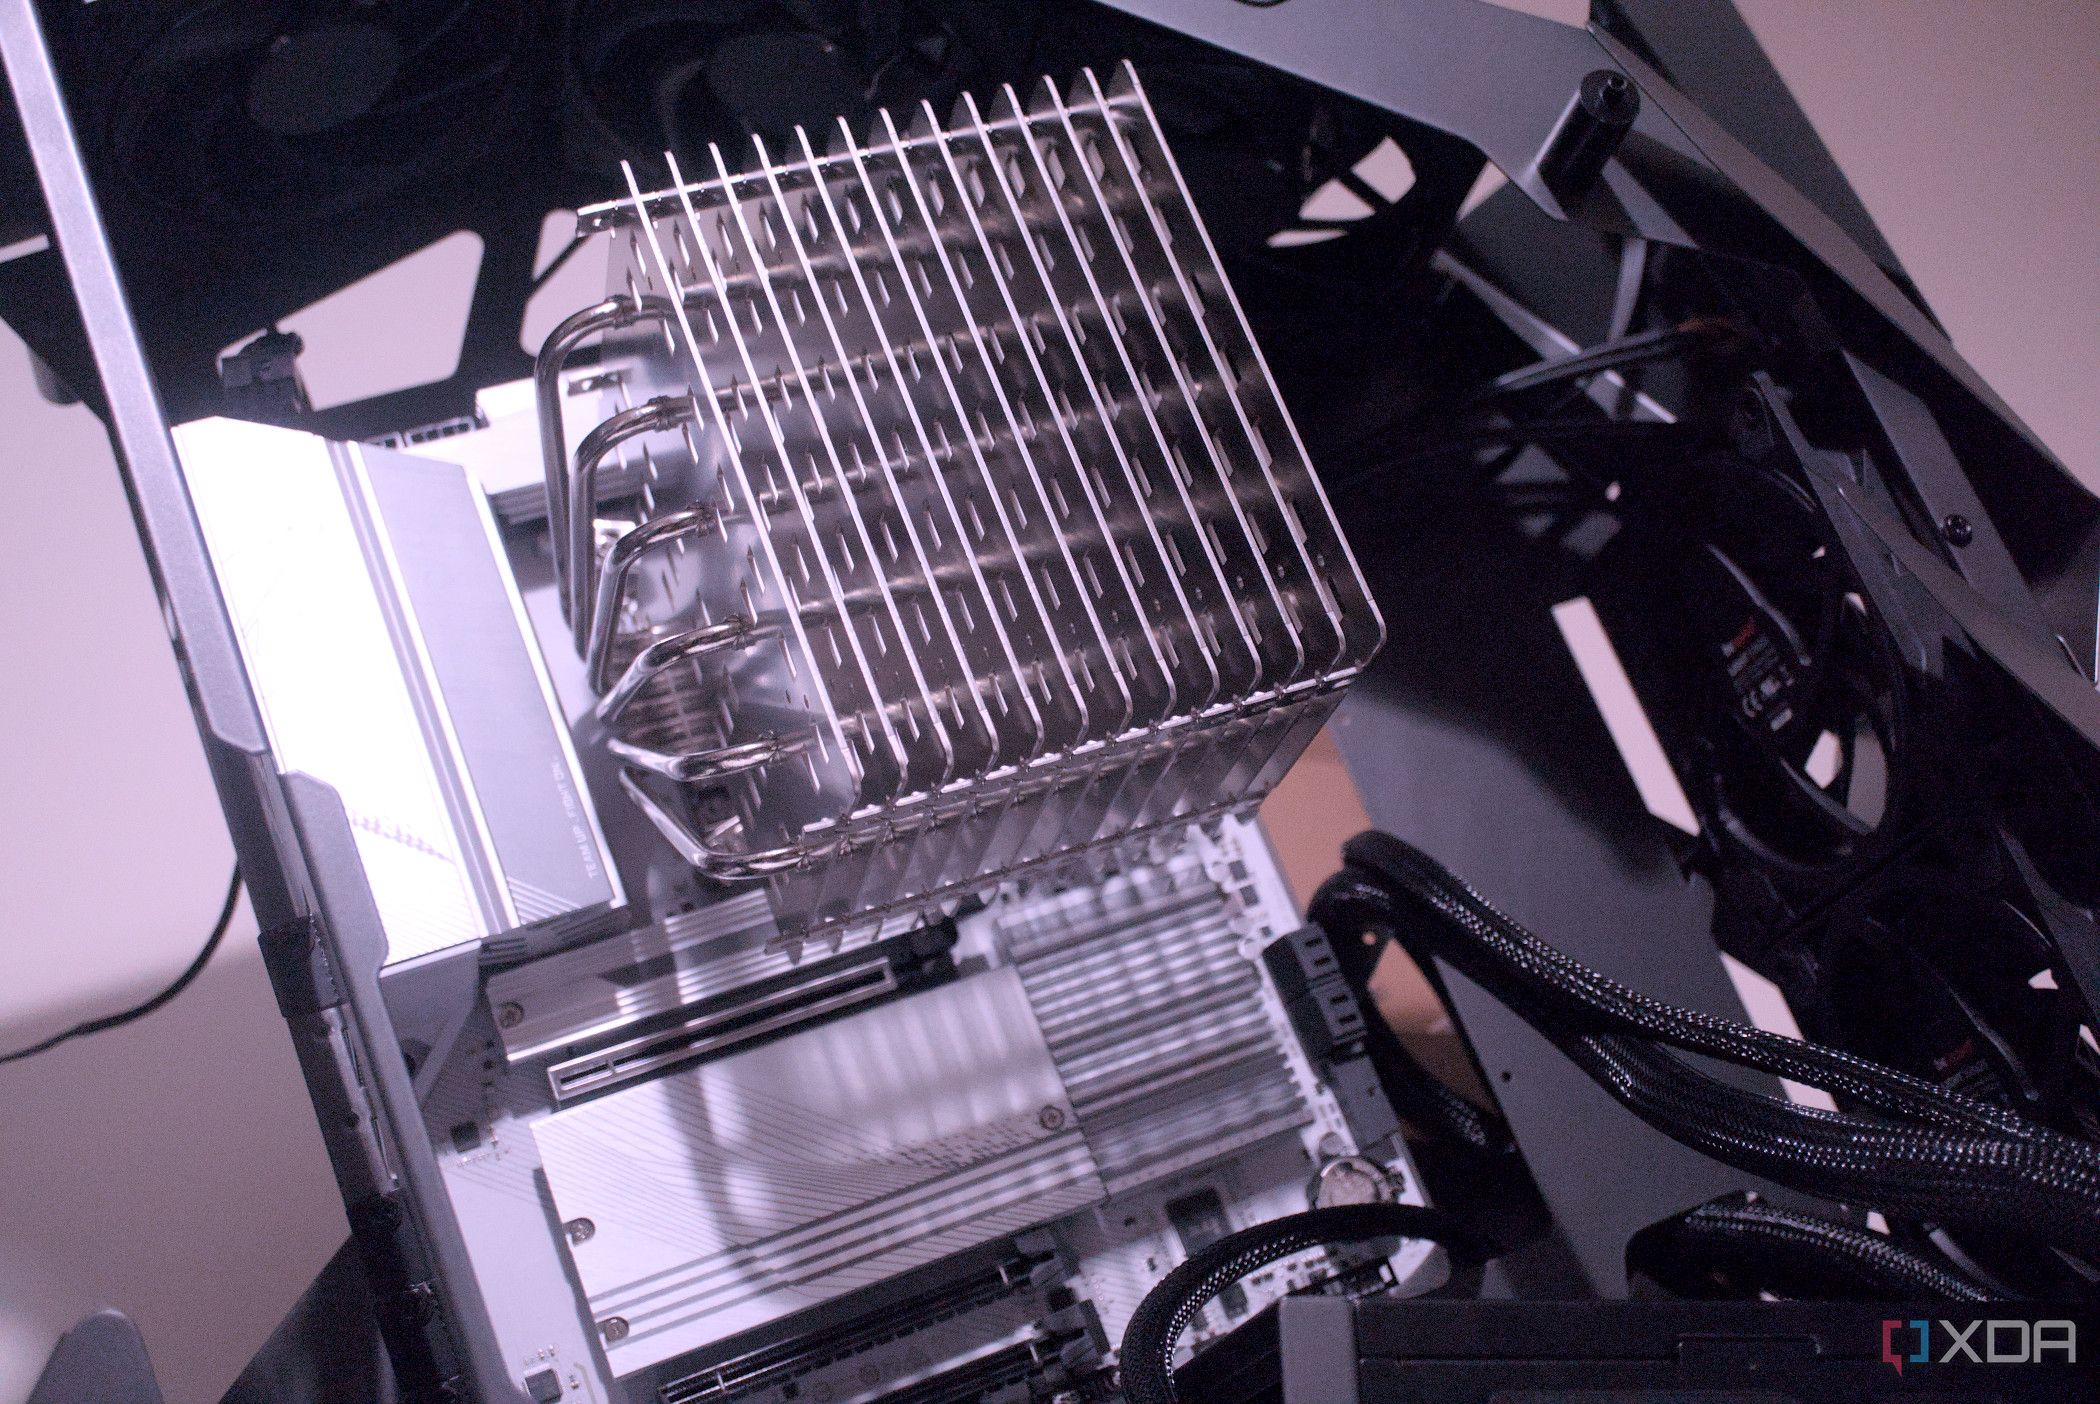 Why you shouldn't save too much money on a PC case